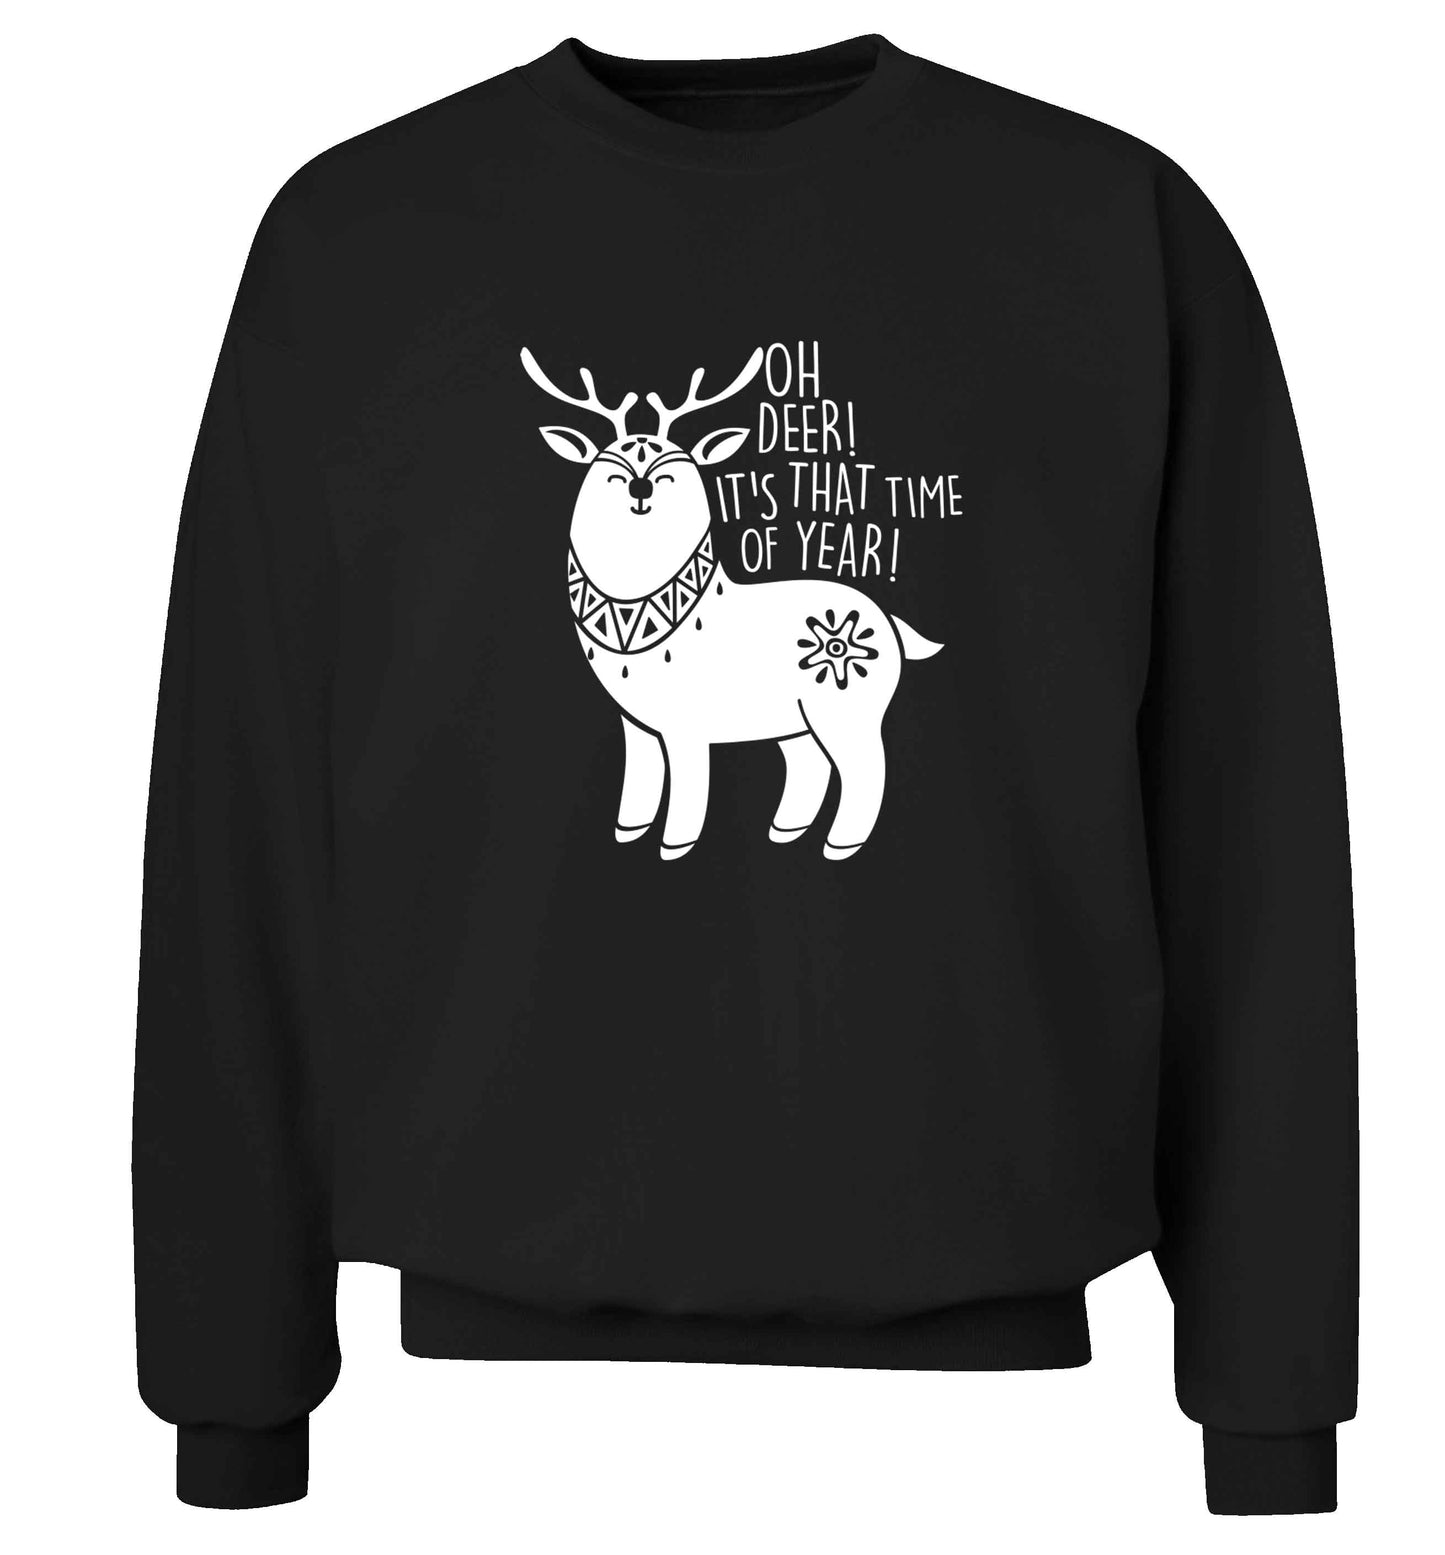 Oh dear it's that time of year Adult's unisex black Sweater 2XL